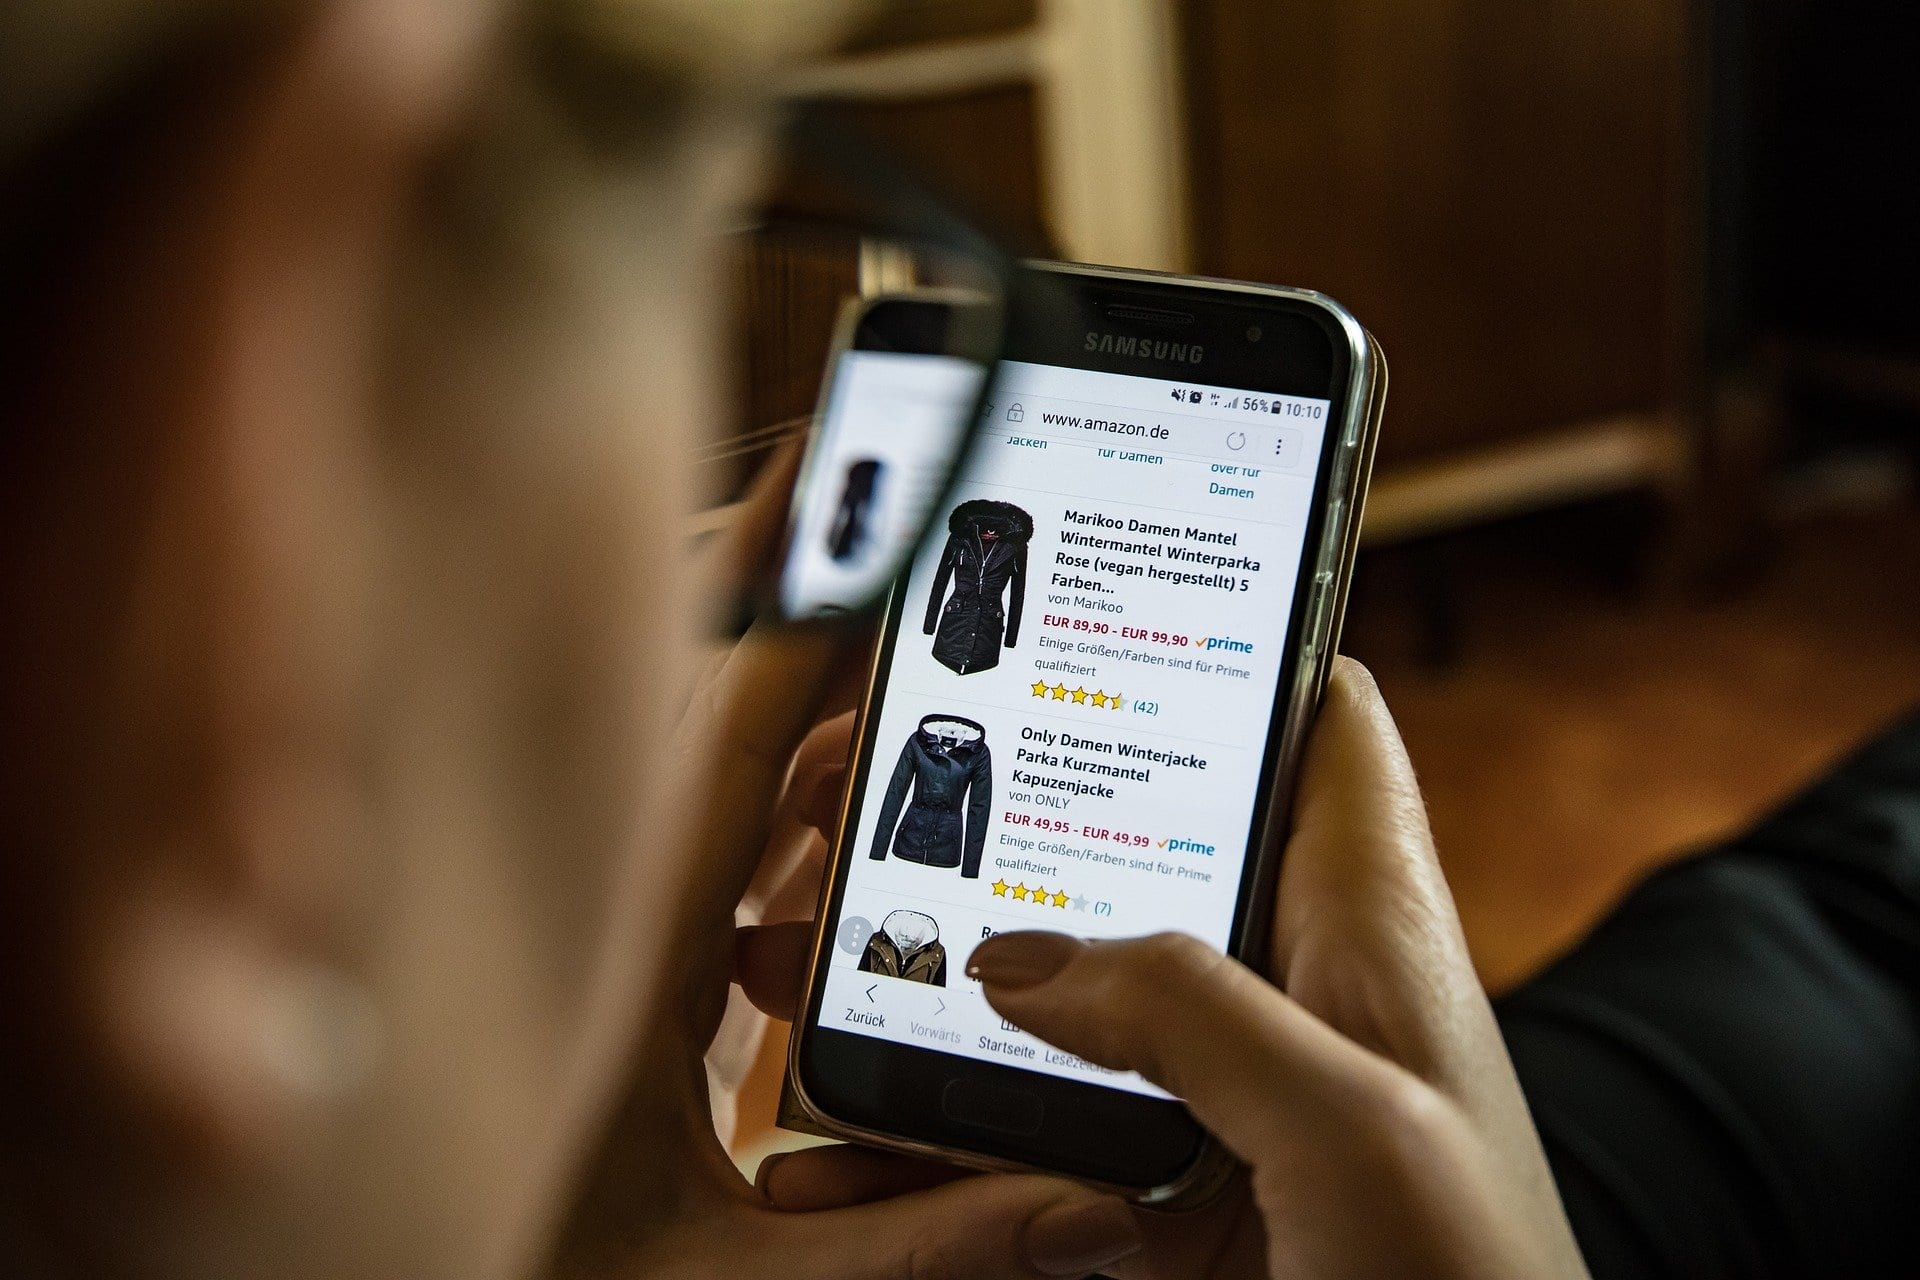 What are the advantages of online shopping